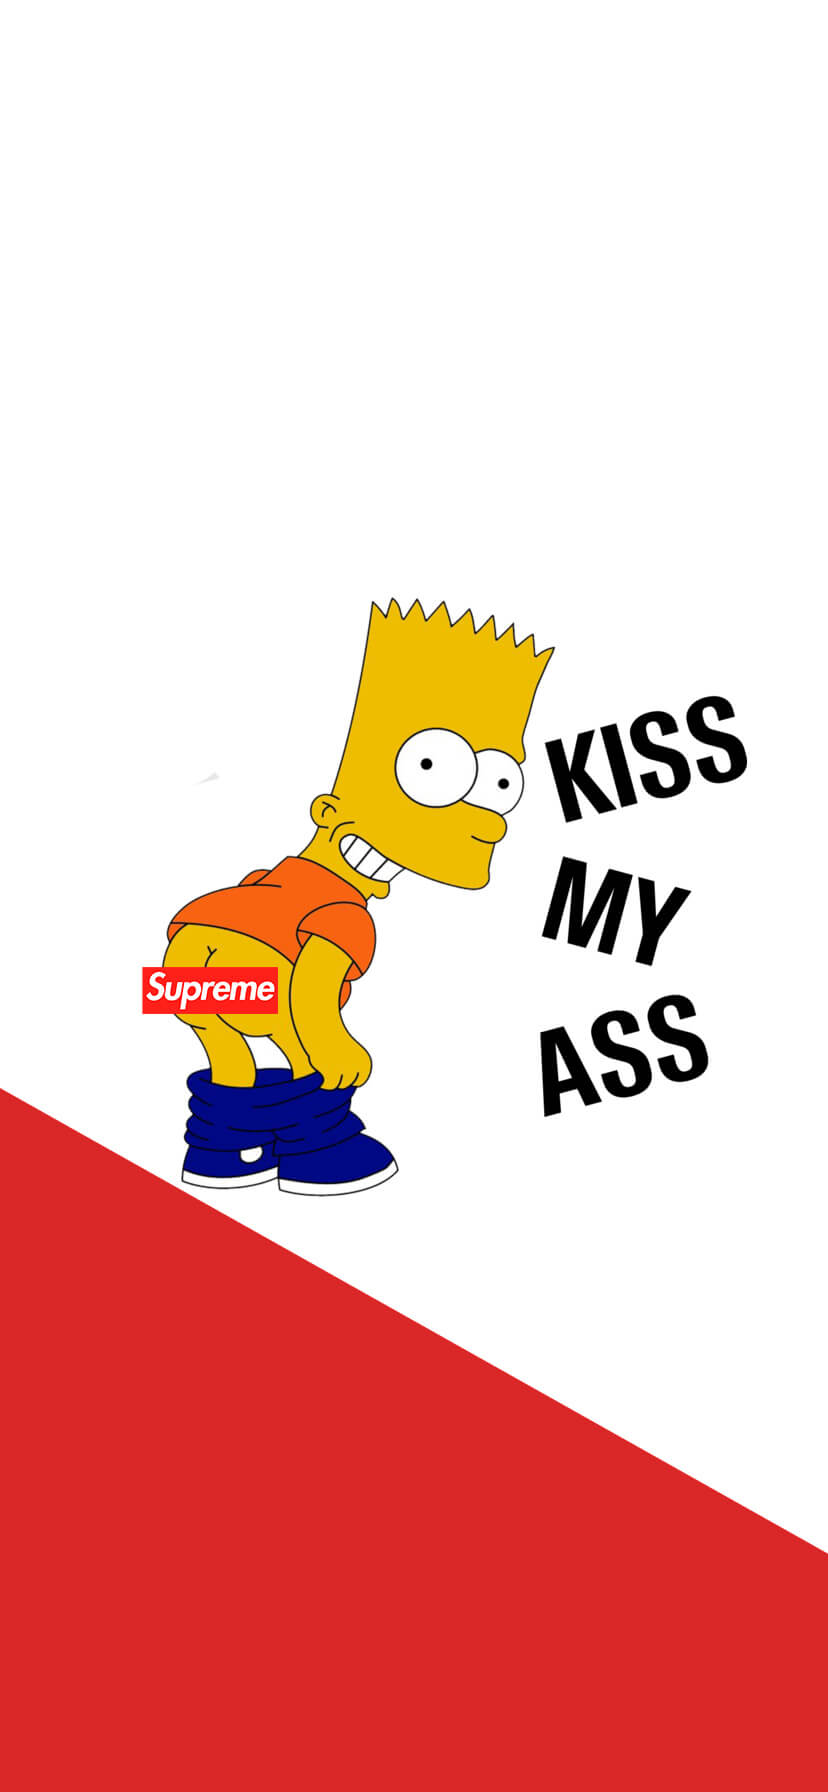 Cartoon Supreme Clothing Wallpapers on